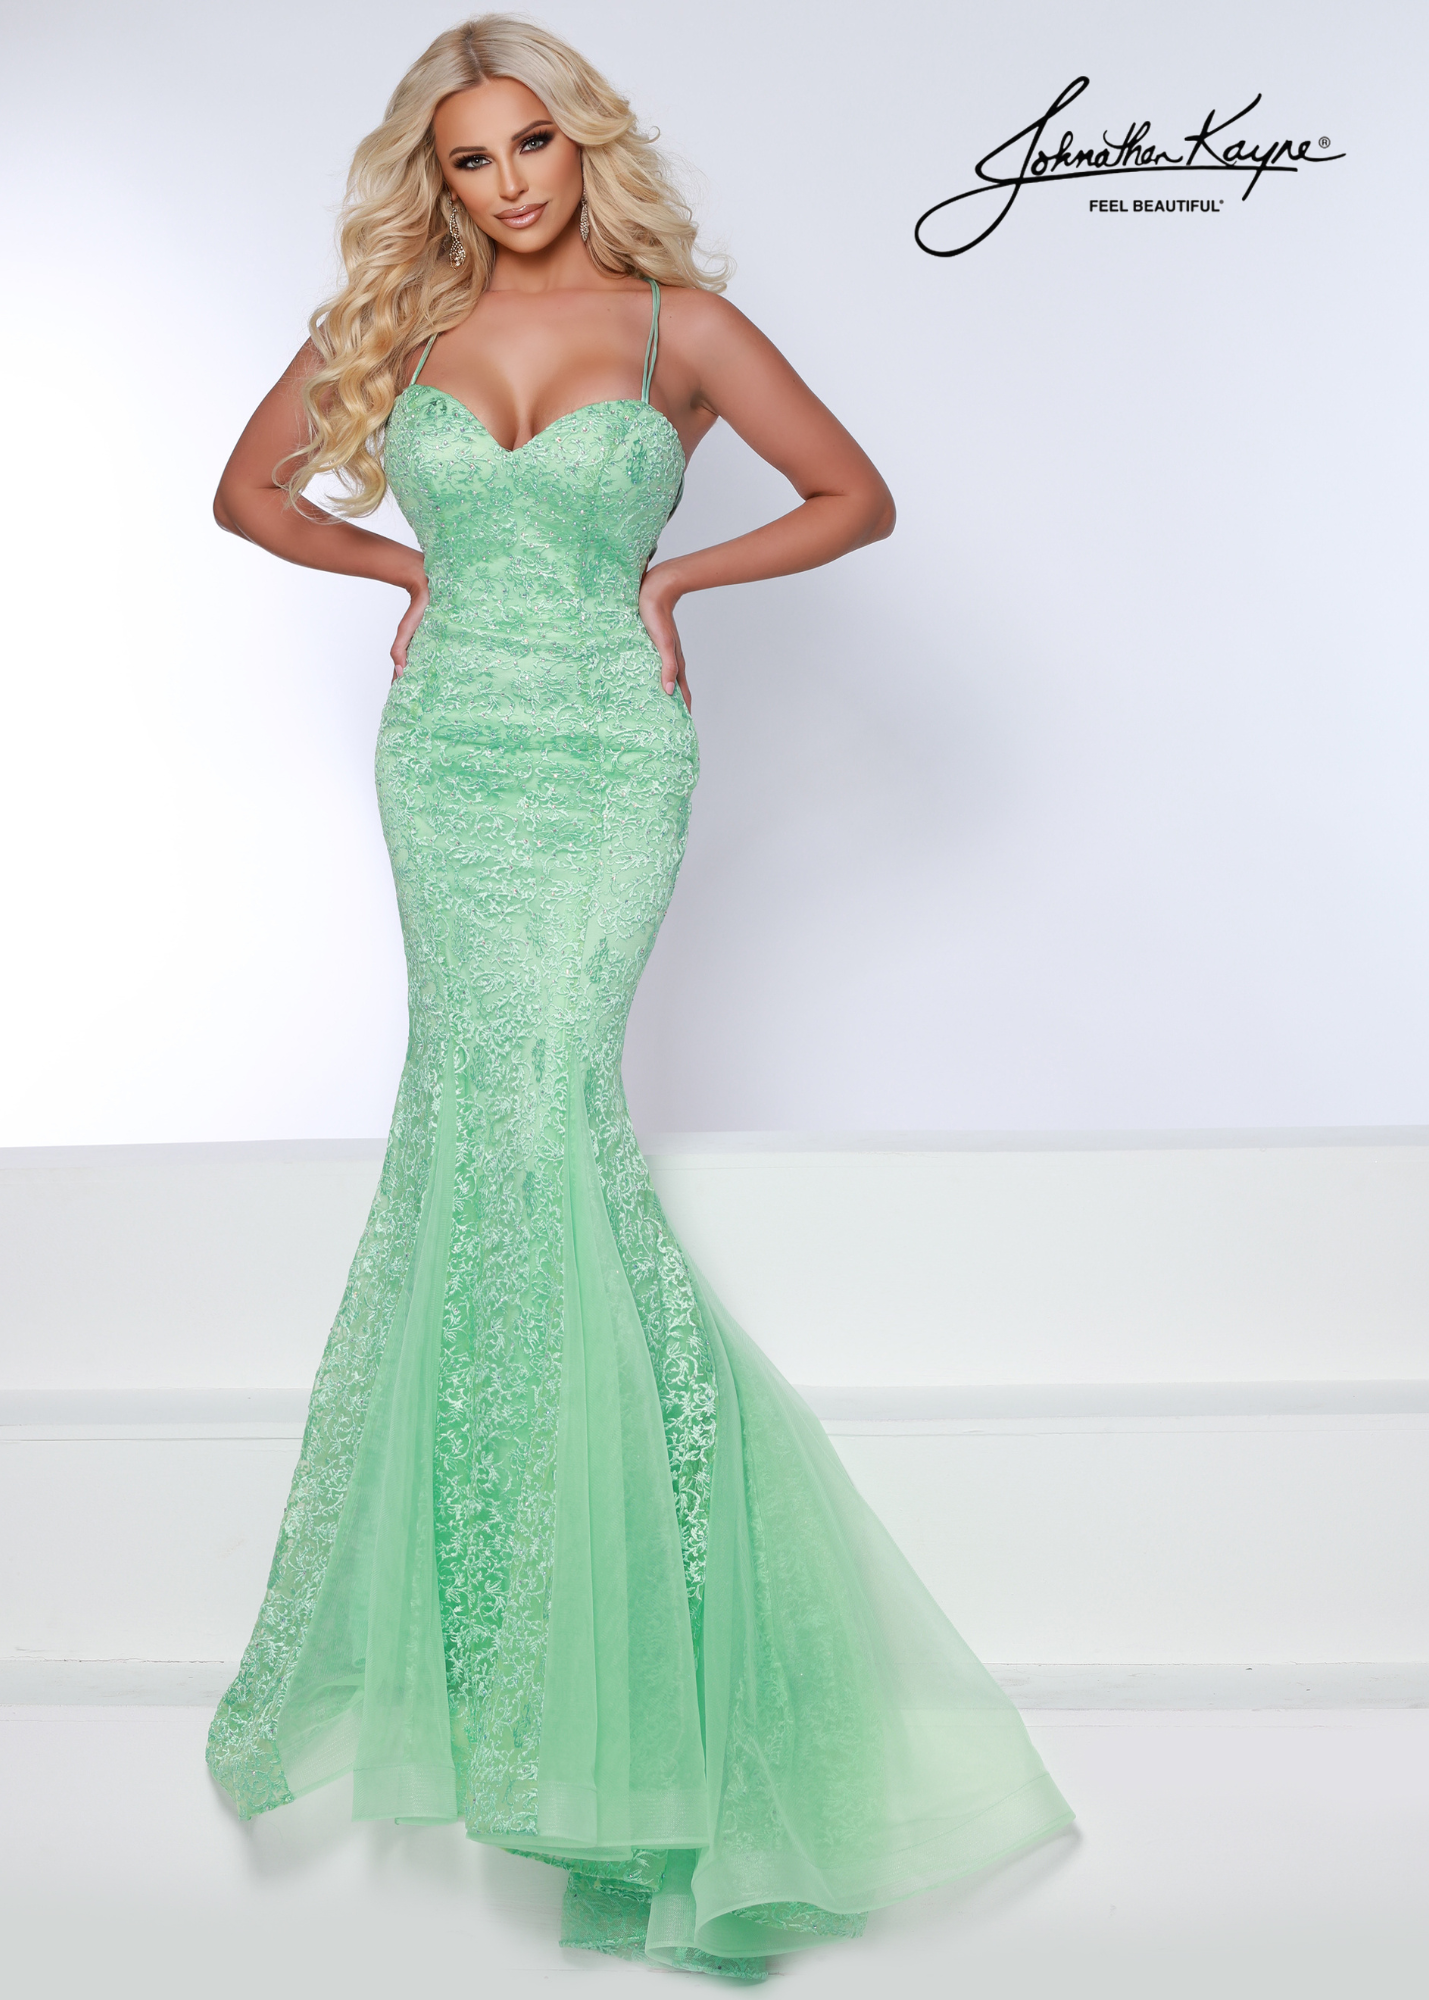 Make a grand entrance in this Johnathan Kayne 2644 Mermaid Lace Backless Dress. With a corset bodice and full-length skirt, you'll be ready to wow the crowd like never before! This stunning number is perfect for proms, pageants and other special occasions. Get ready to drop some jaws!  Size: 2  Color: Magenta